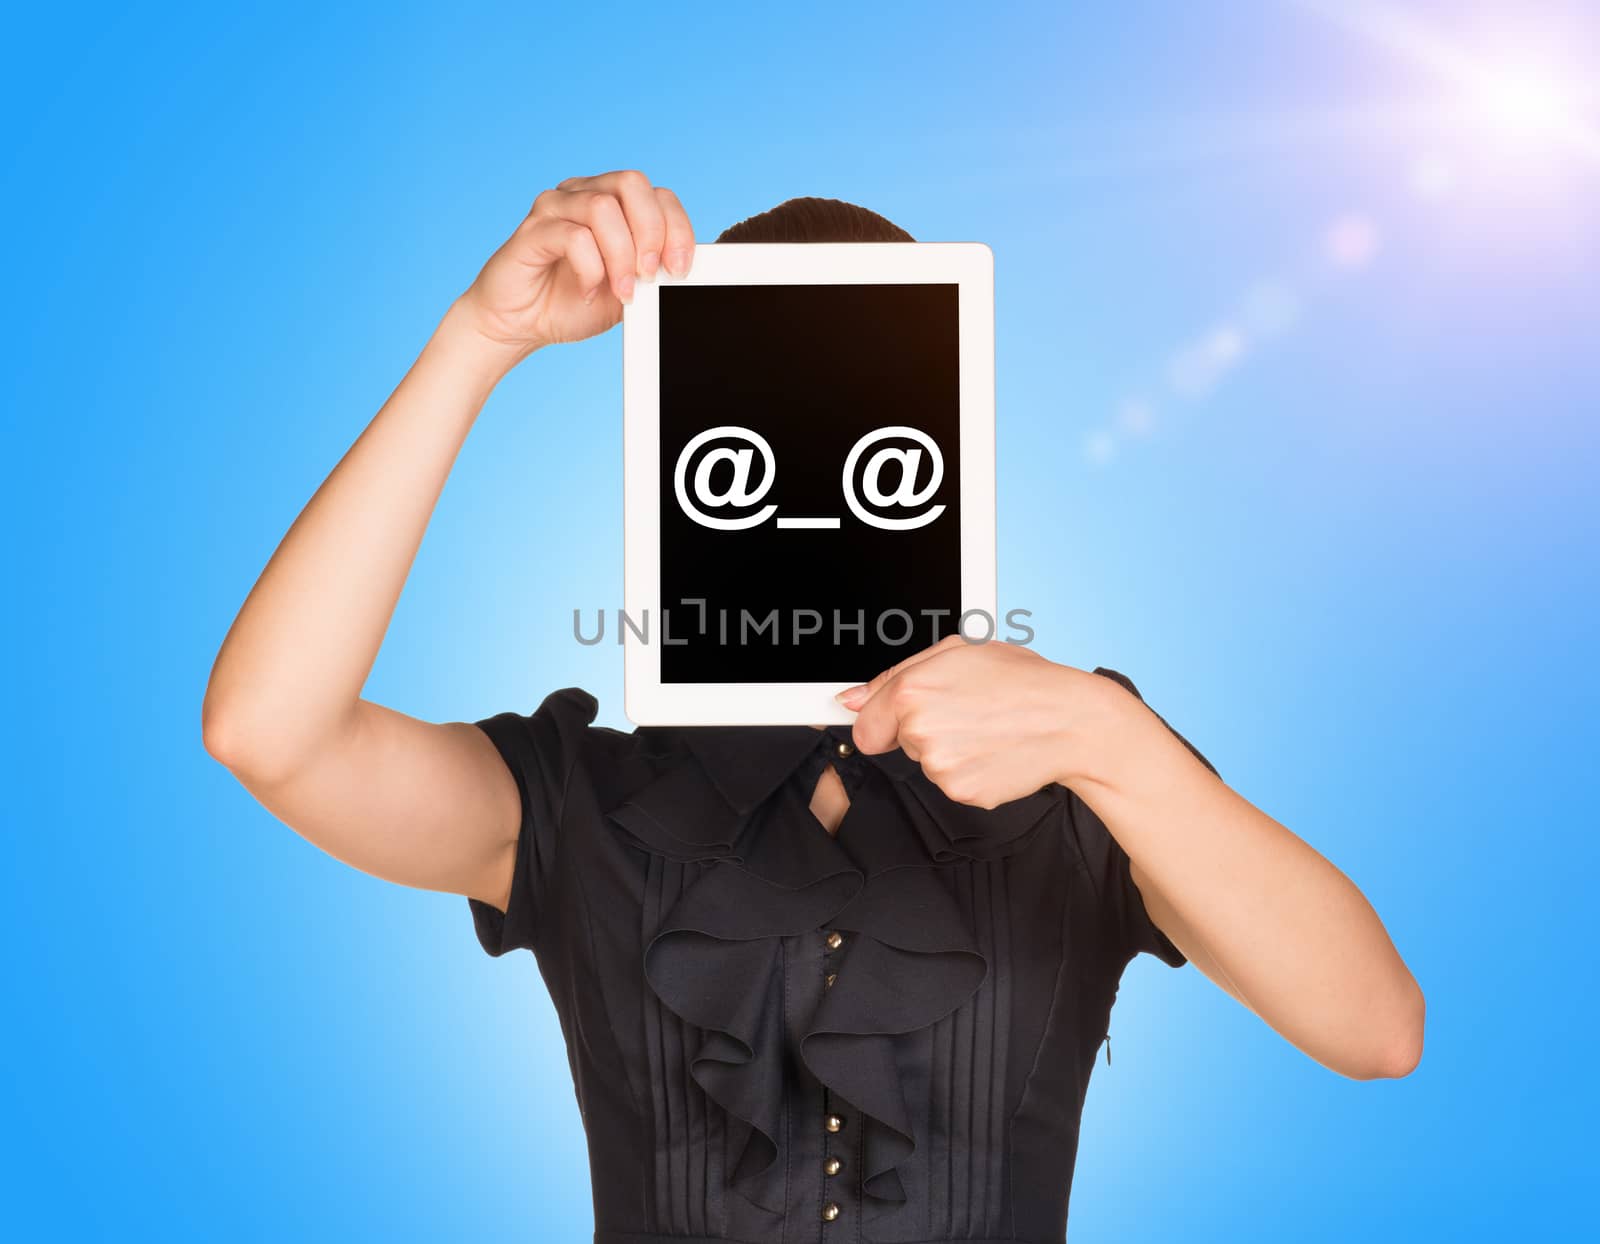 Young girl in dress covered her face with tablet. On screen code smiley. Blue sky with sun light as backdrop